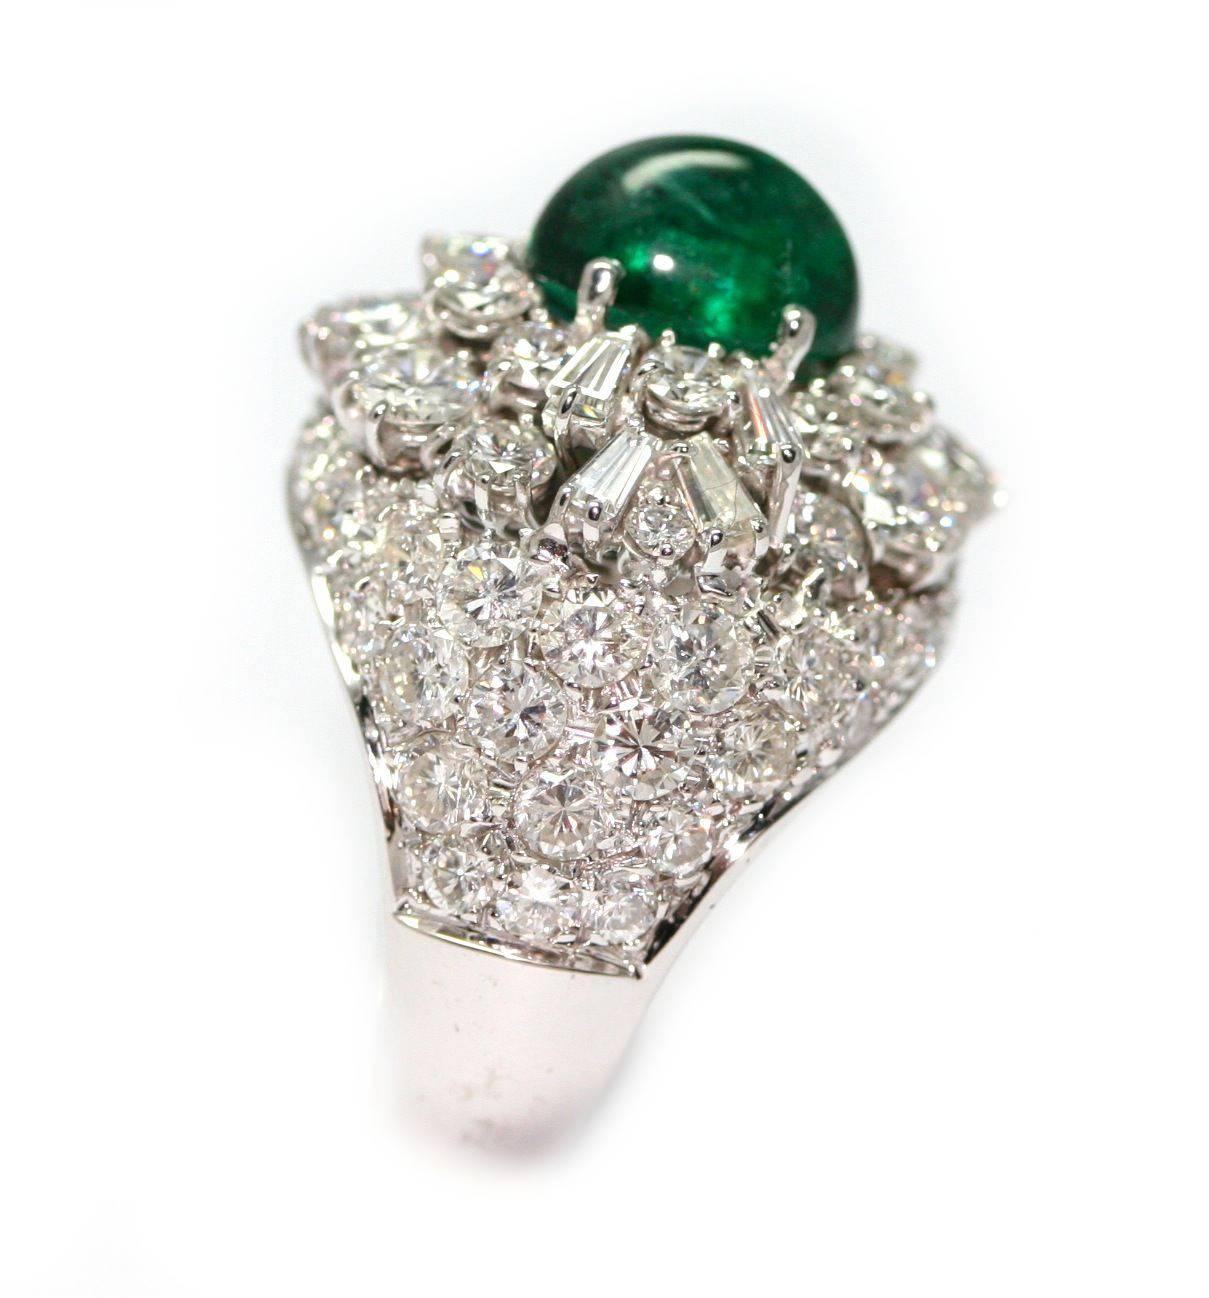 Women's Dome ring set with 5 carats of diamonds and a 2.68 carats sugarloaf emerald For Sale